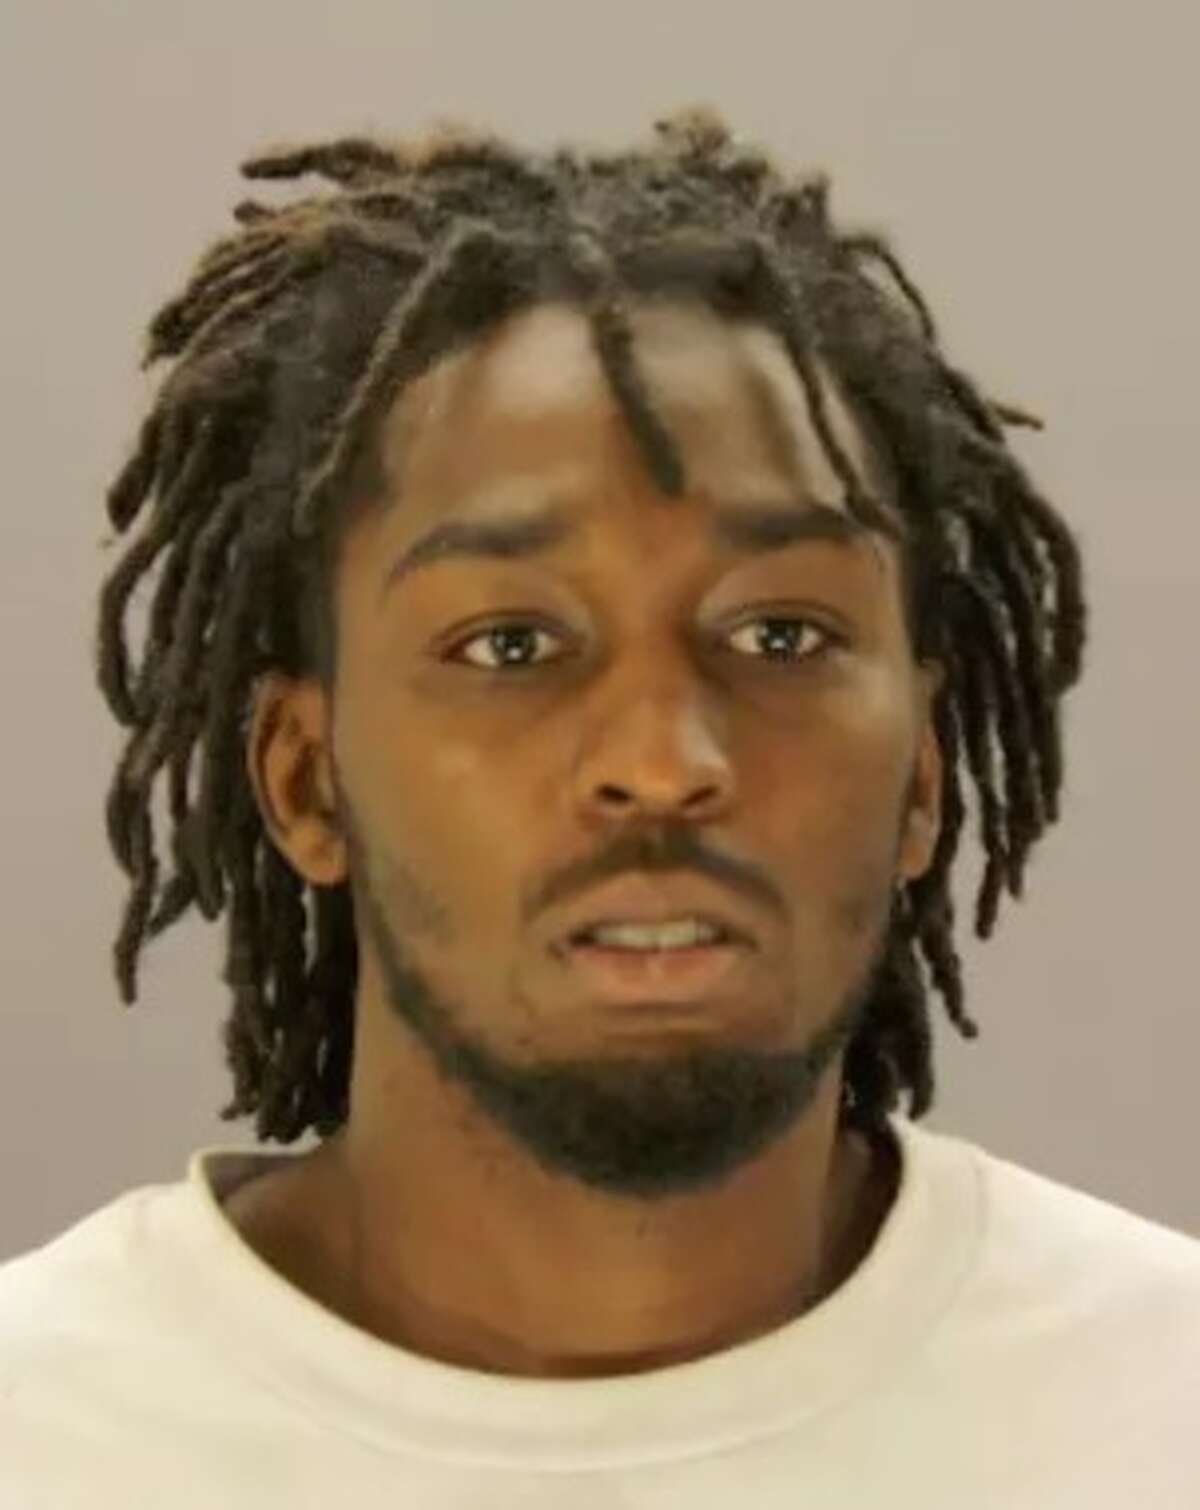 Dominque Desha Green, 24, allegedly incriminated himself after he did a Facebook Live video that appeared to show he was in possession of cocaine during a traffic stop in Dallas, Sept. 9, 2016. Click through the slideshow to see maps that explain the world's drug trade. 